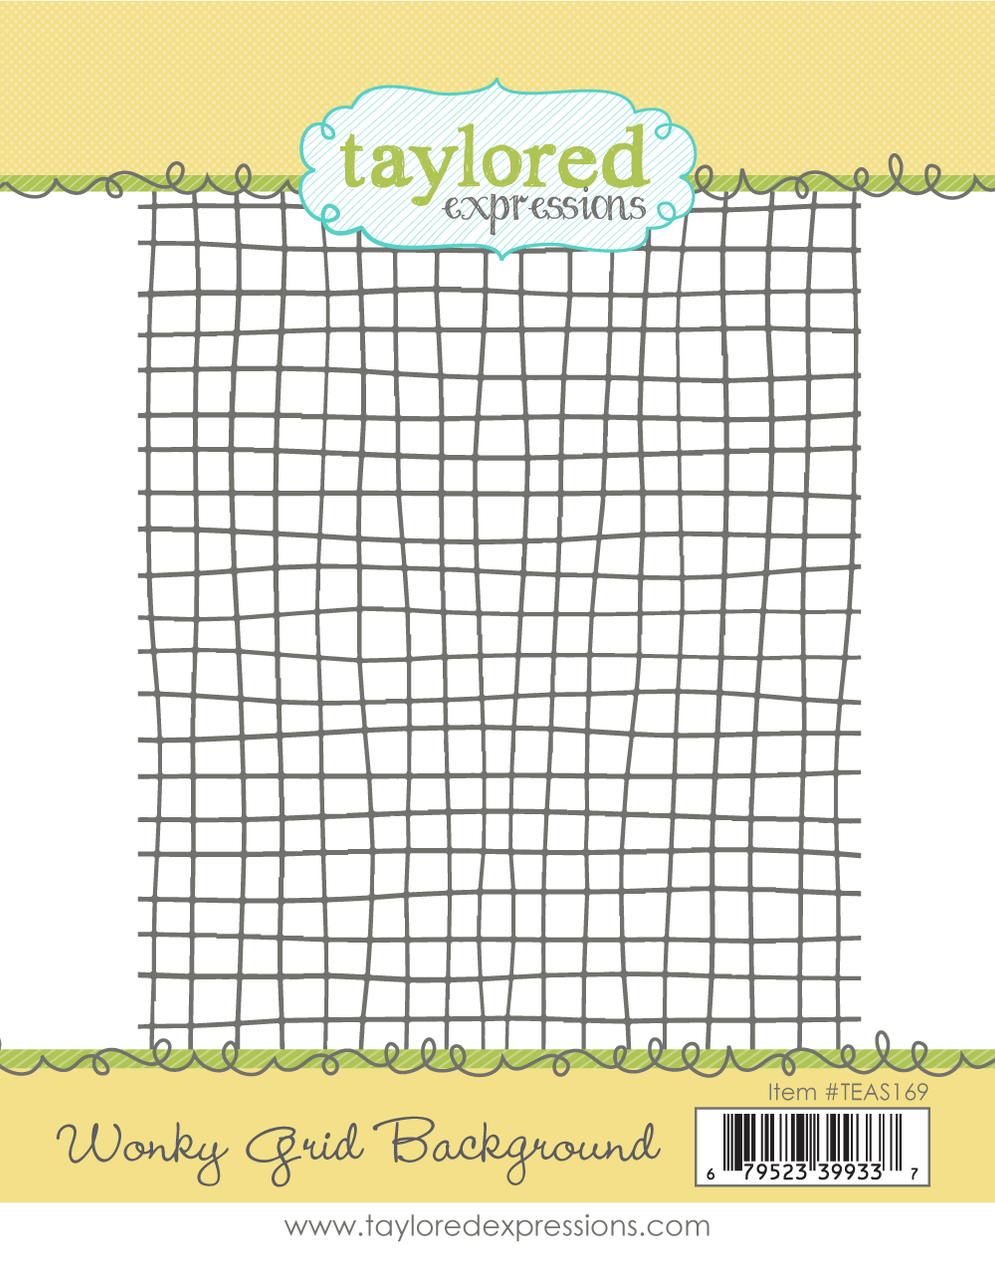 Taylored Expressions - Wonky Grid Background Stamp